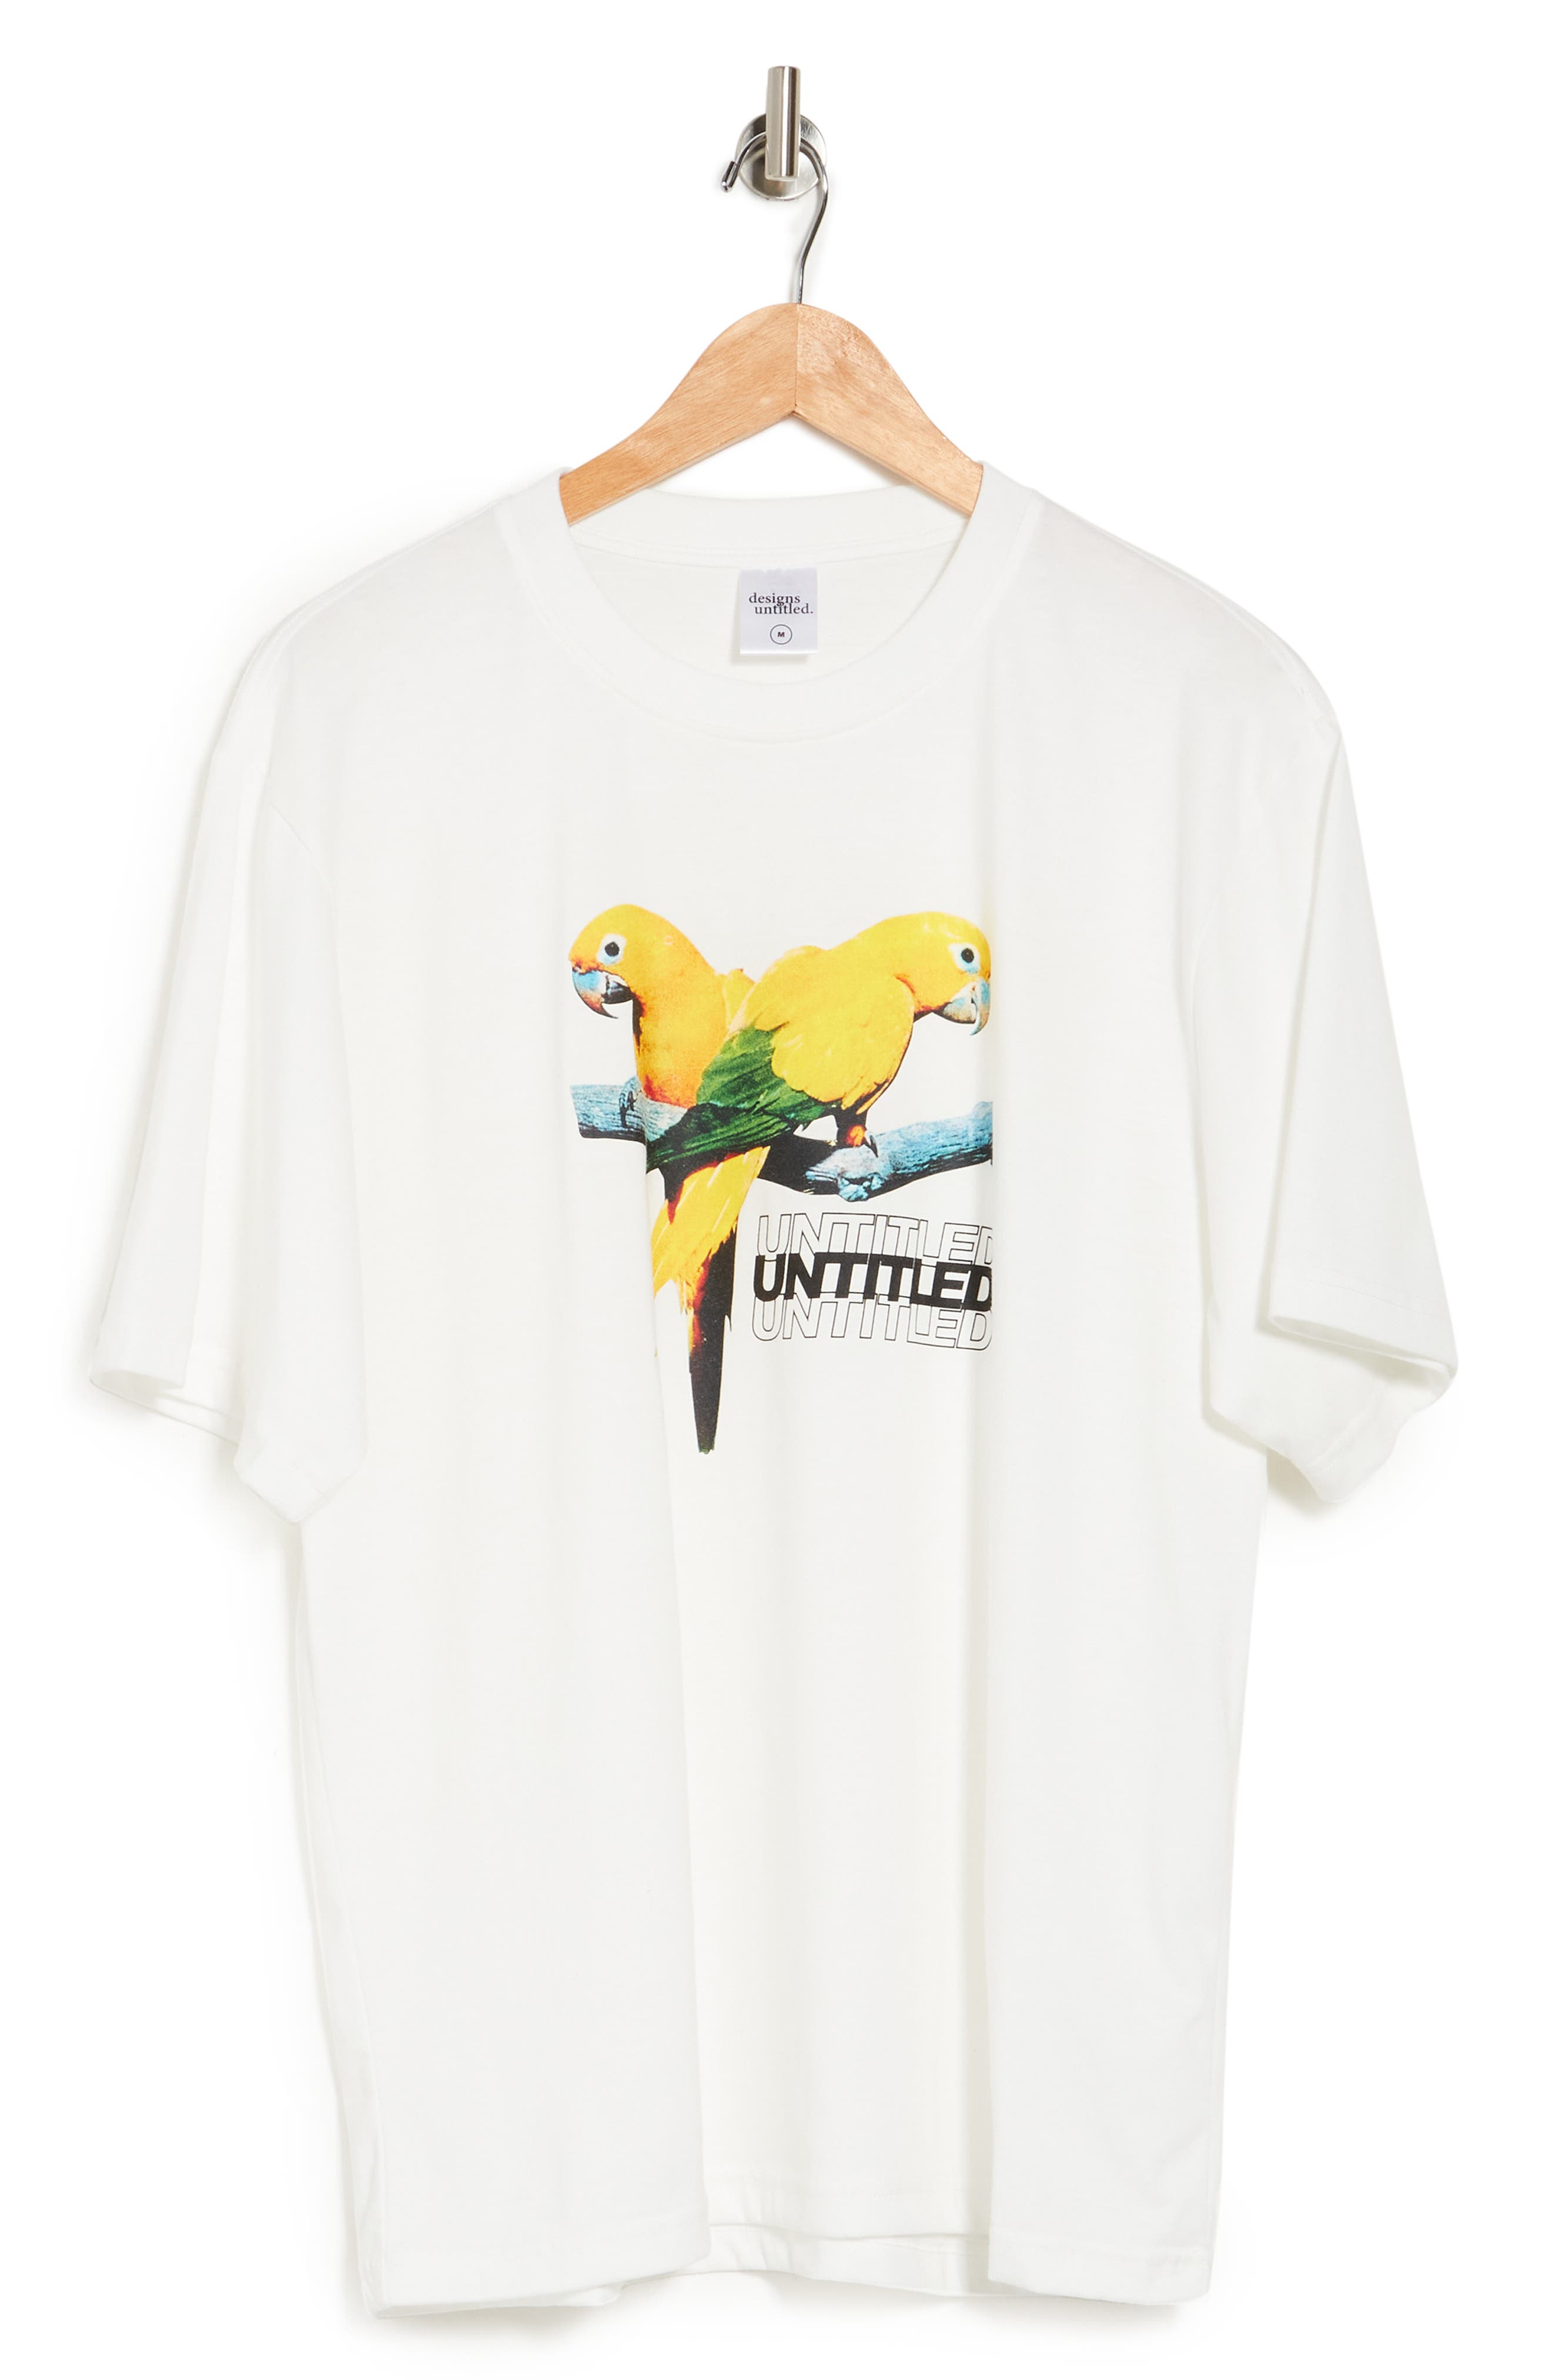 Designs Untitled Crew Neck Short Sleeve Graphic T-shirt In White